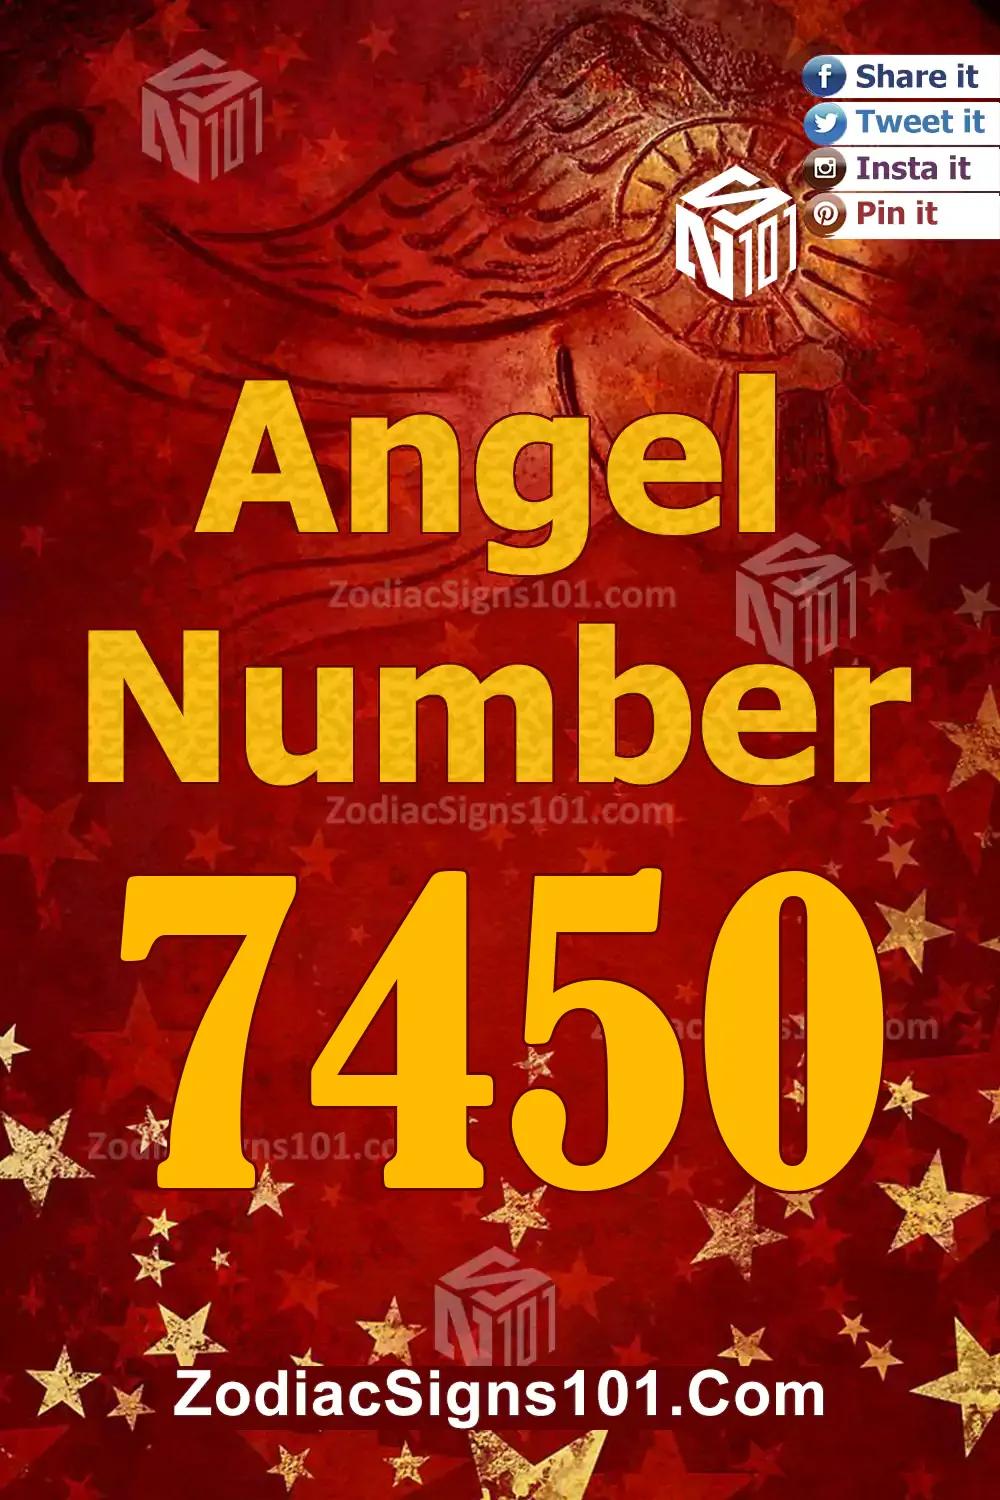 7450 Angel Number Meaning